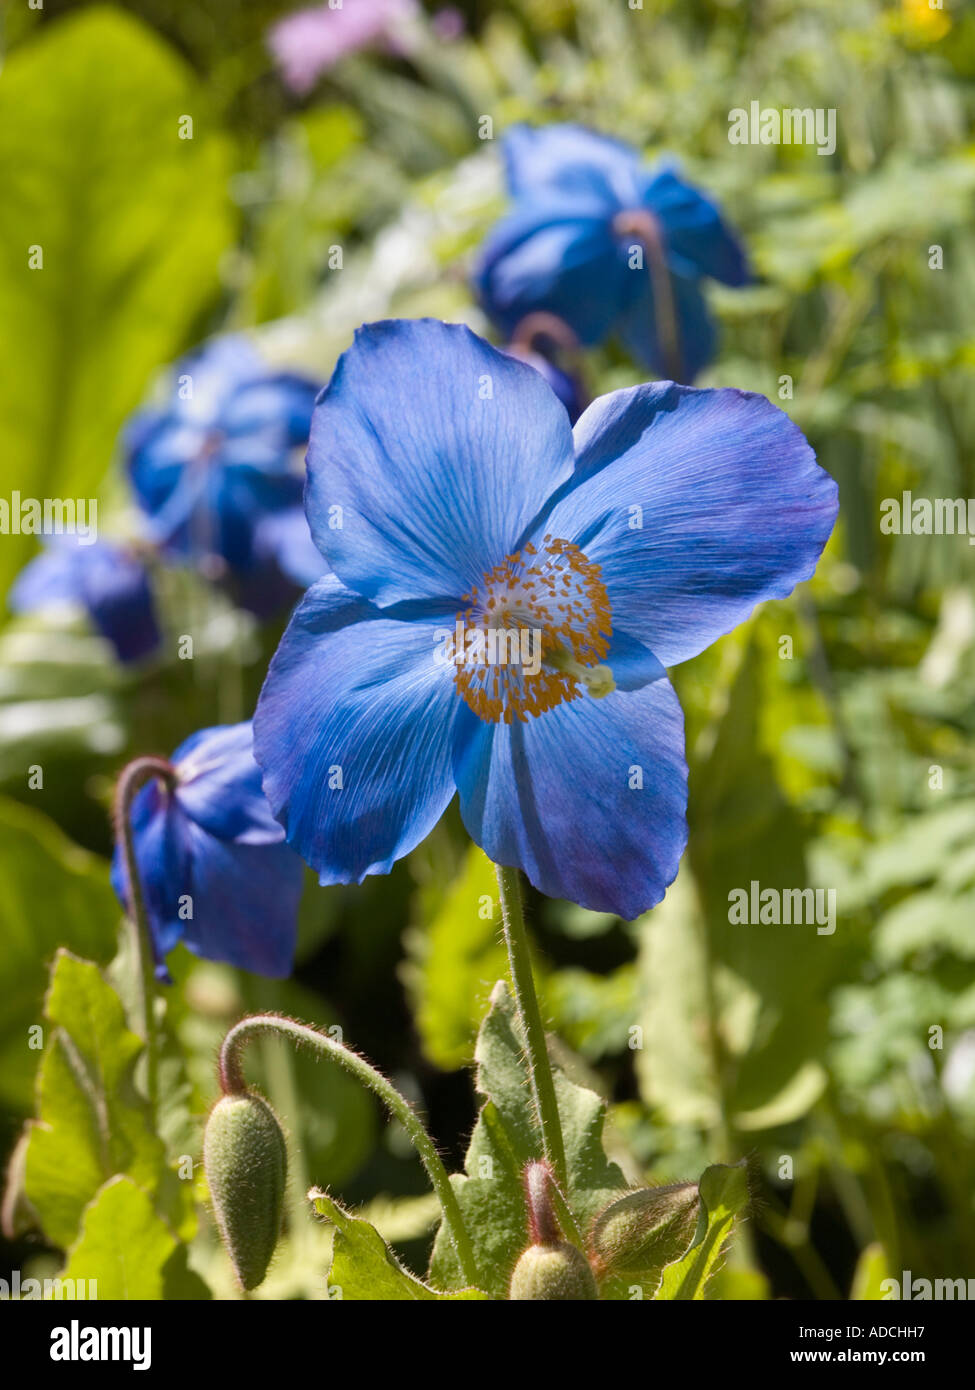 'Himalayan Poppy' Meconopsis grandis blue form flower backlit in close up in a garden in early summer Stock Photo